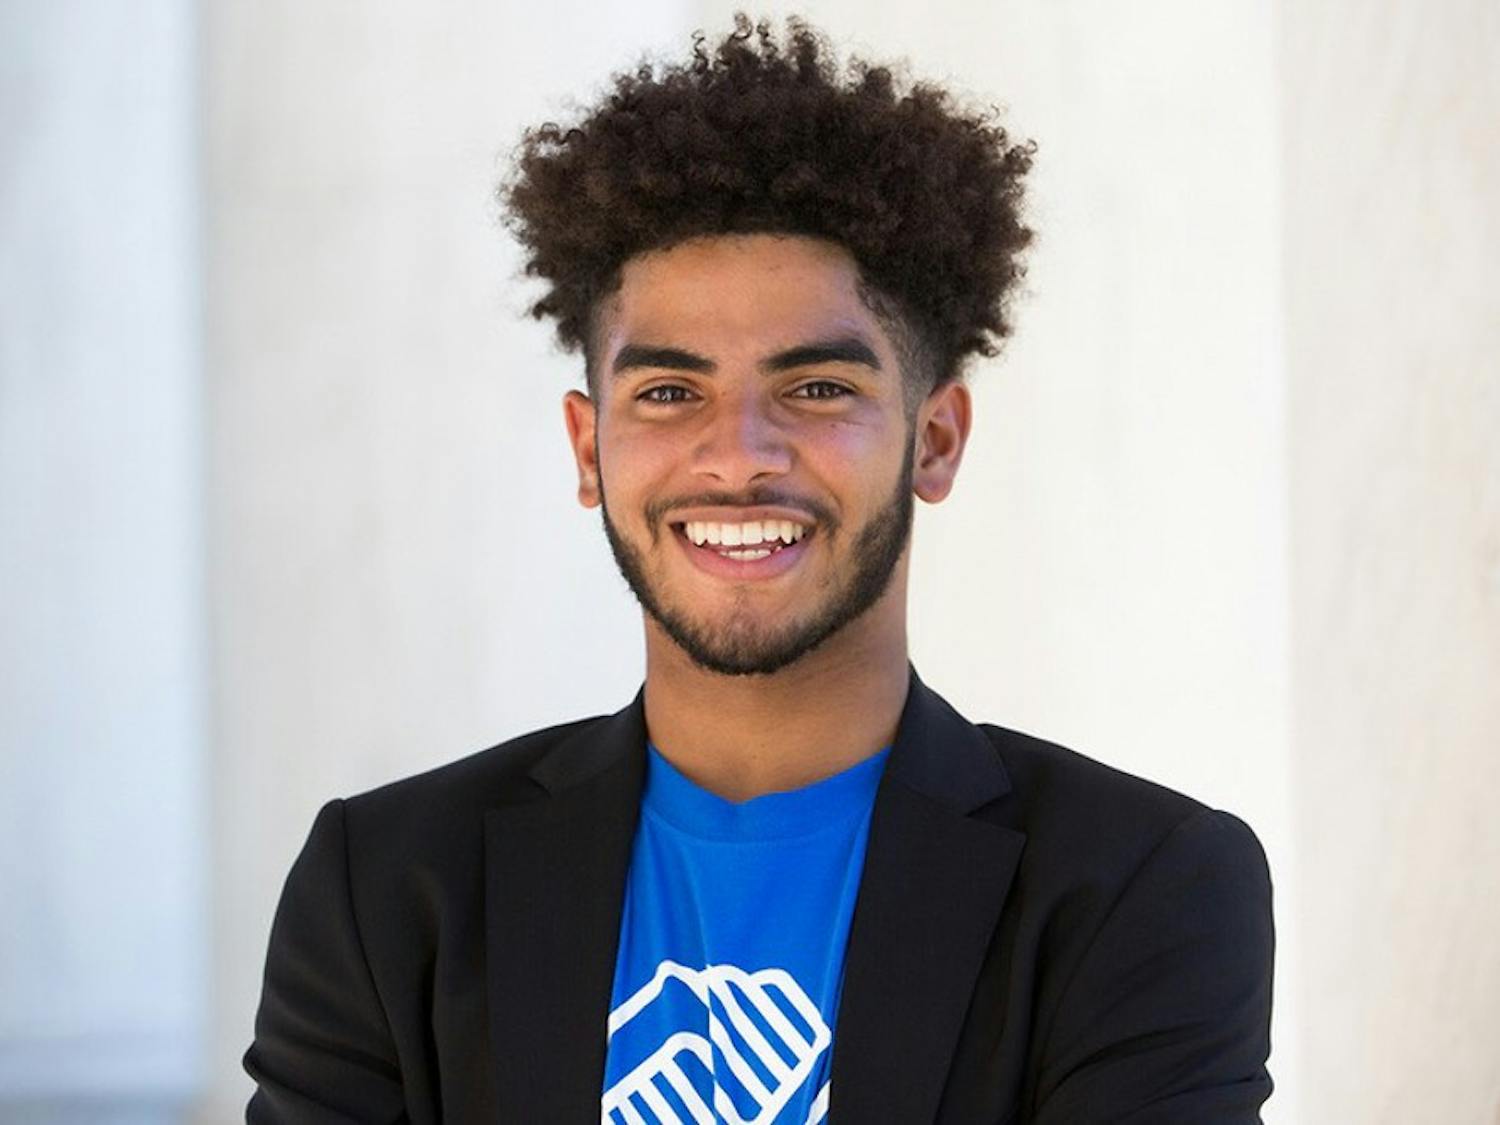 Carlos Polanco '21 was named National Youth of the Year by the Boys and Girls Clubs, out of six finalists.